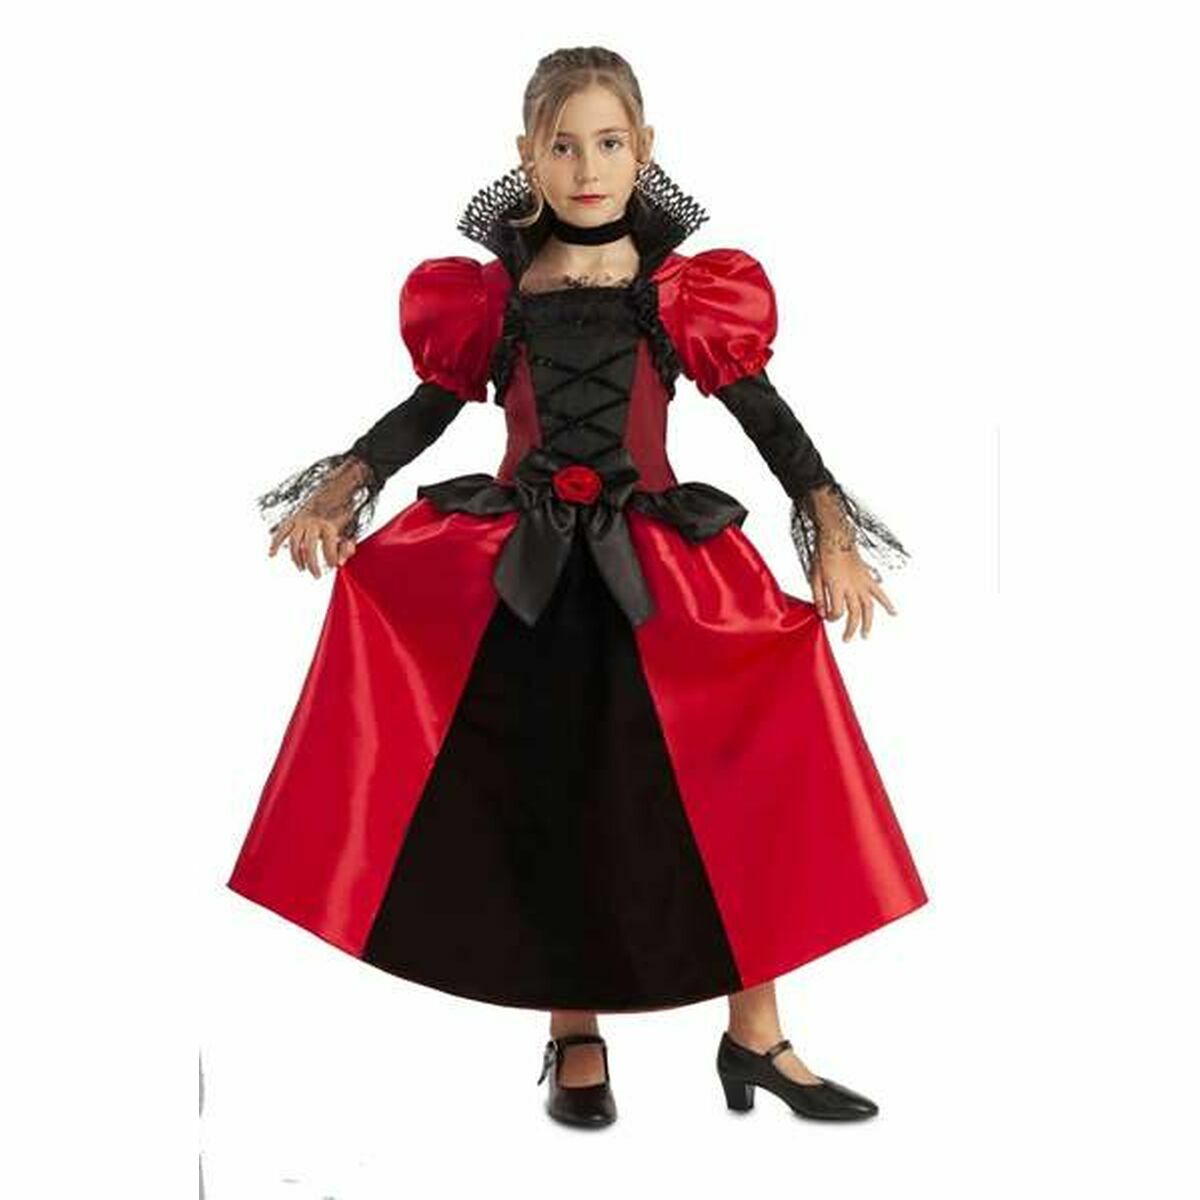 Costume for Children My Other Me Gothic Vampiress Red 12 (2 Pieces)